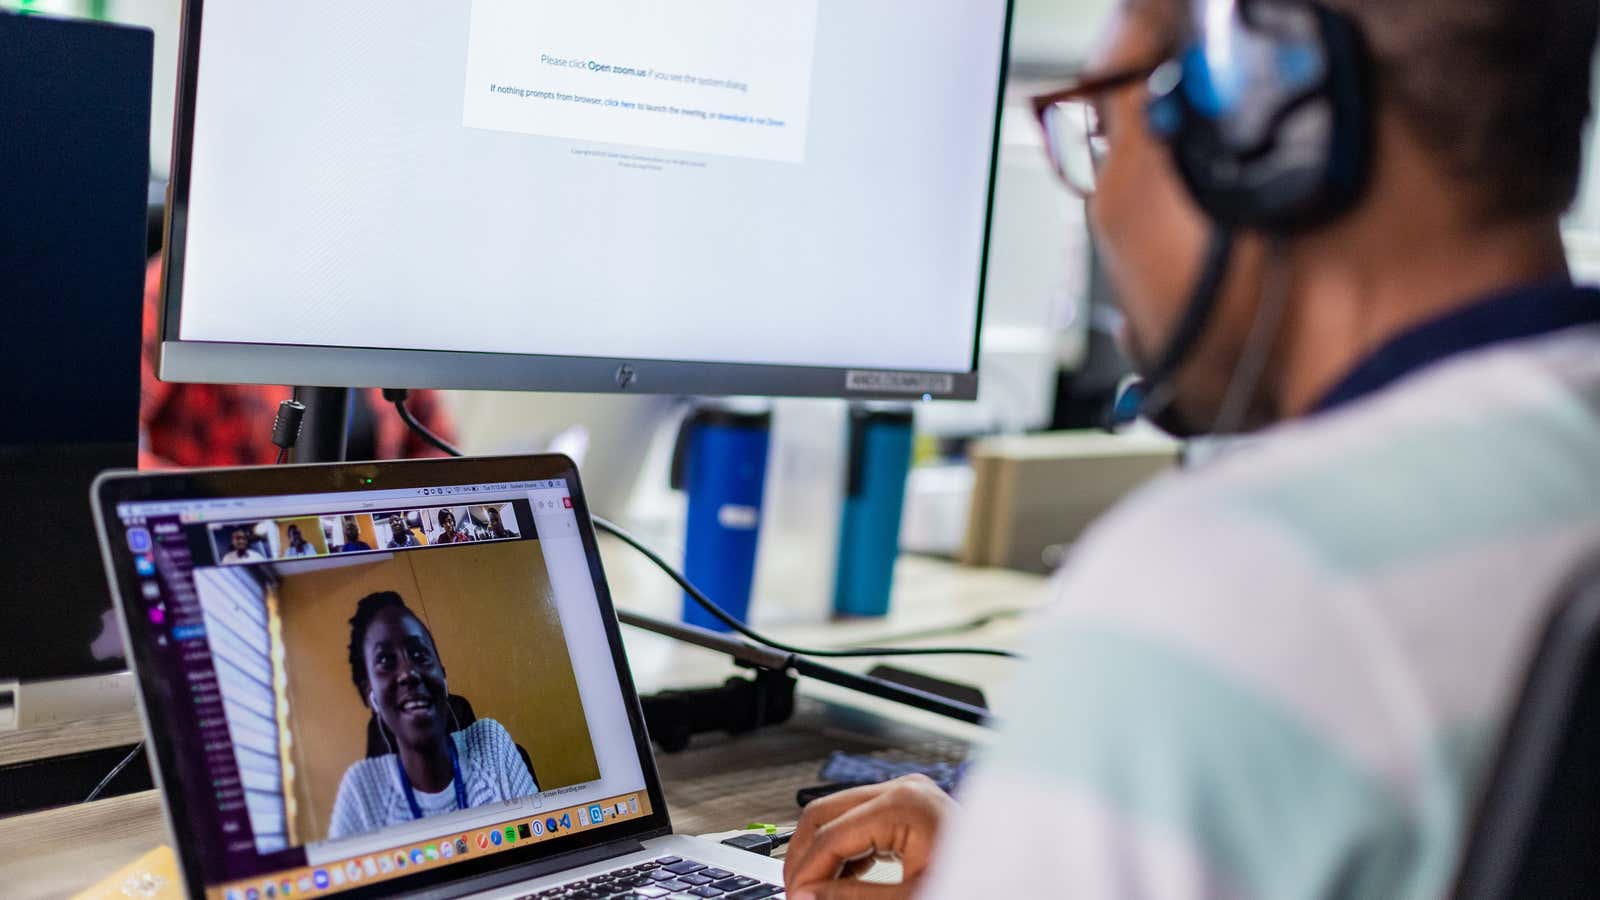 Developer outsourcing company Andela now has engineers spread across 37 countries, on five continents